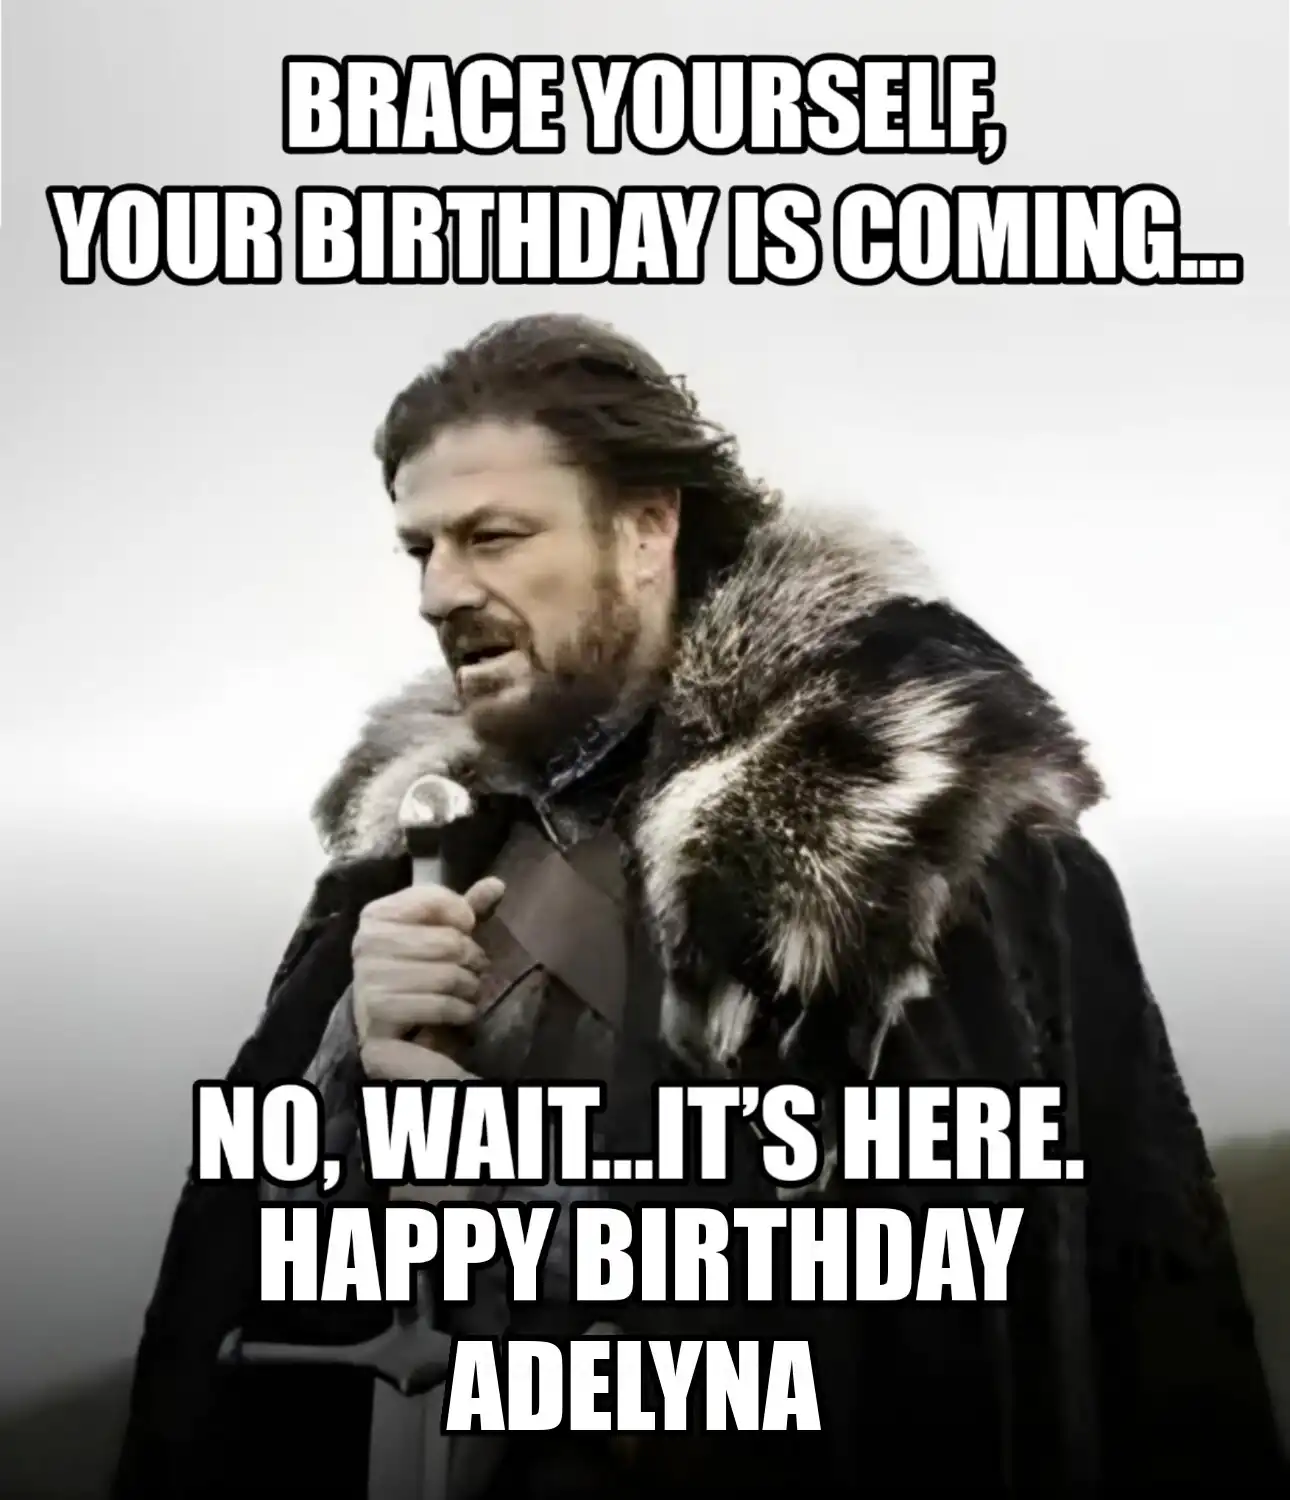 Happy Birthday Adelyna Brace Yourself Your Birthday Is Coming Meme